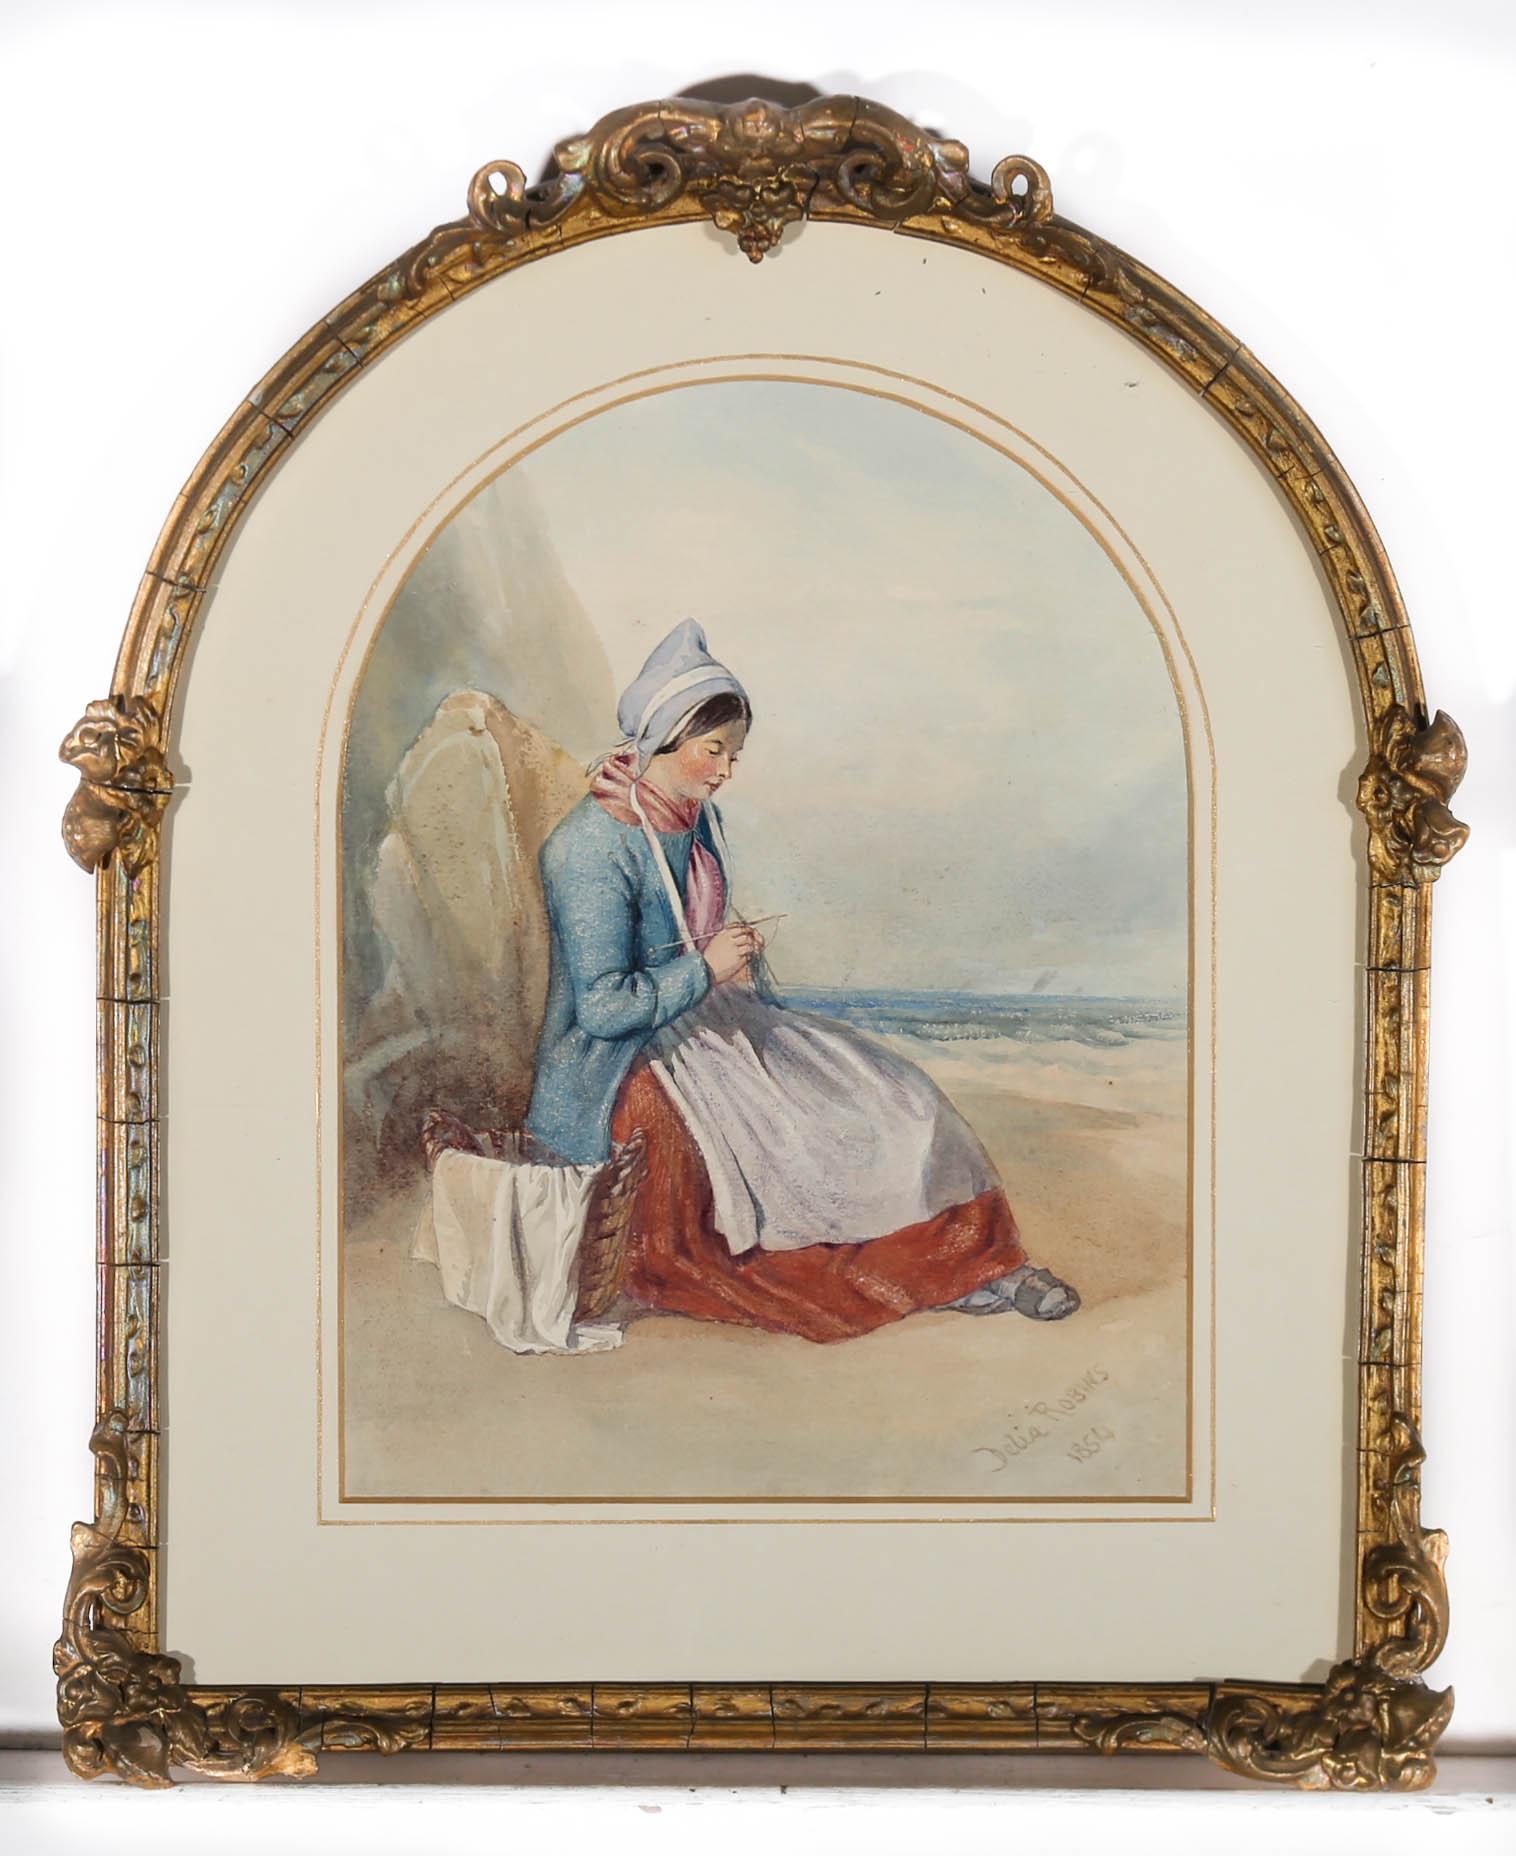 This delightful scene depicts a woman perched on a rock looking intently at her knitting. In the background waves crash against the sandy shoreline. The artist pays particular attention to the fine folds in the woman's clothes that carefully fall to